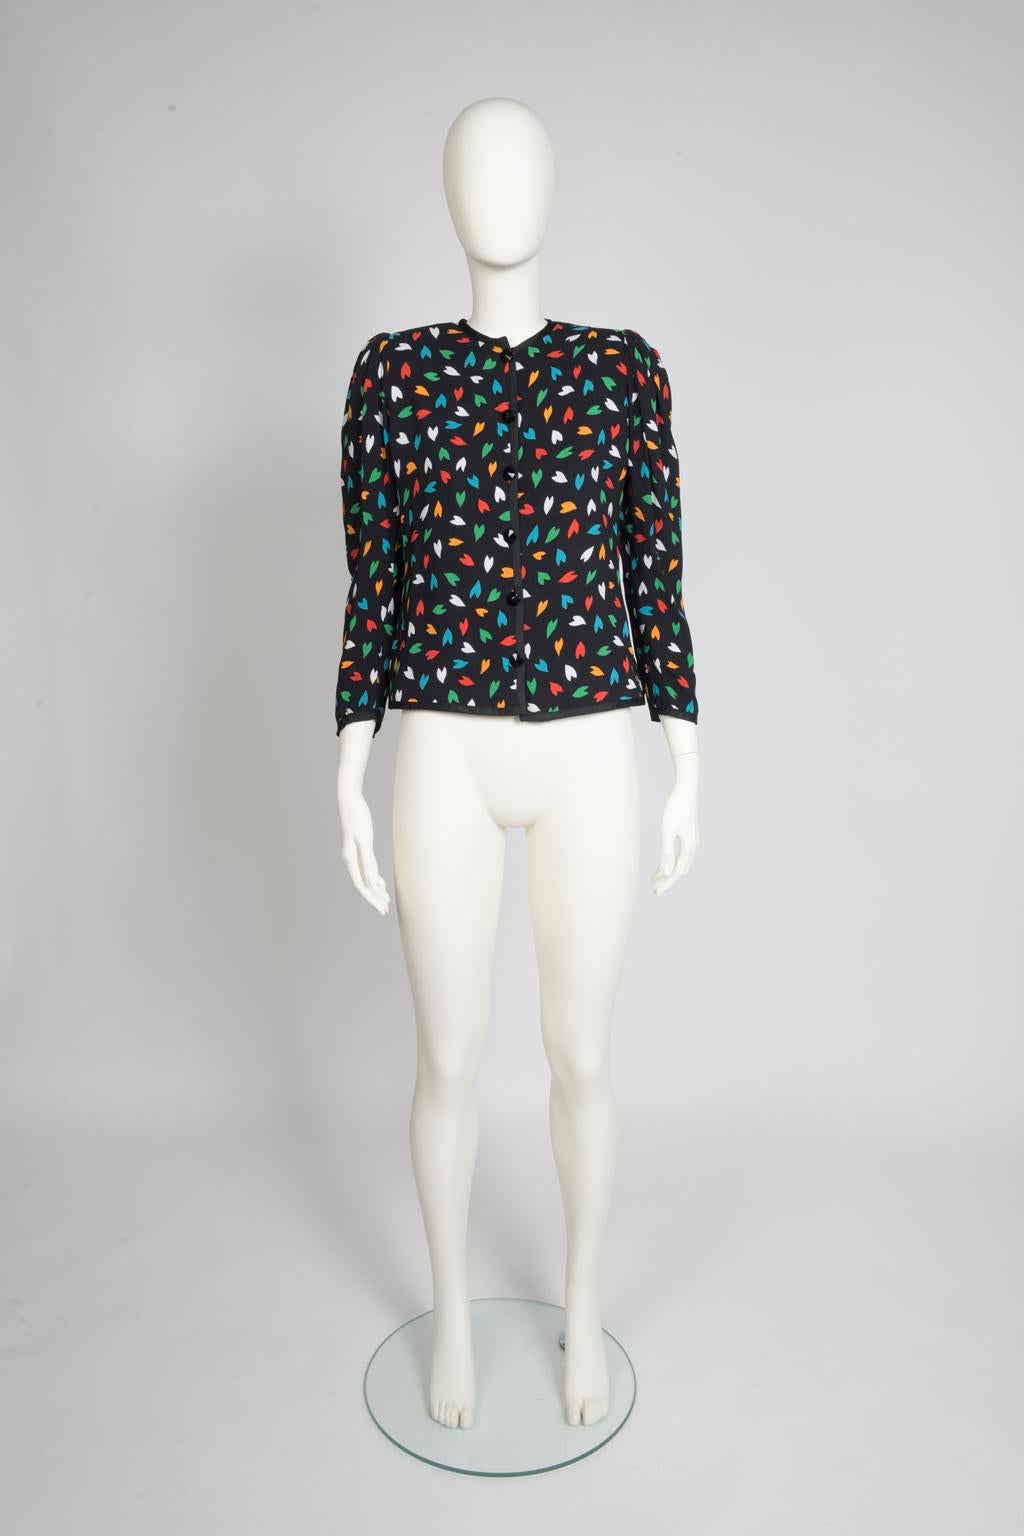 At Julia's Dressing, we do adore Saint Laurent and his cheerful prints ! Designed in a slim silhouette from silk crepe, this late 70's shirt-jacket features a colorful abstract heart pattern. Black ribbed passementerie braid is to be found along the